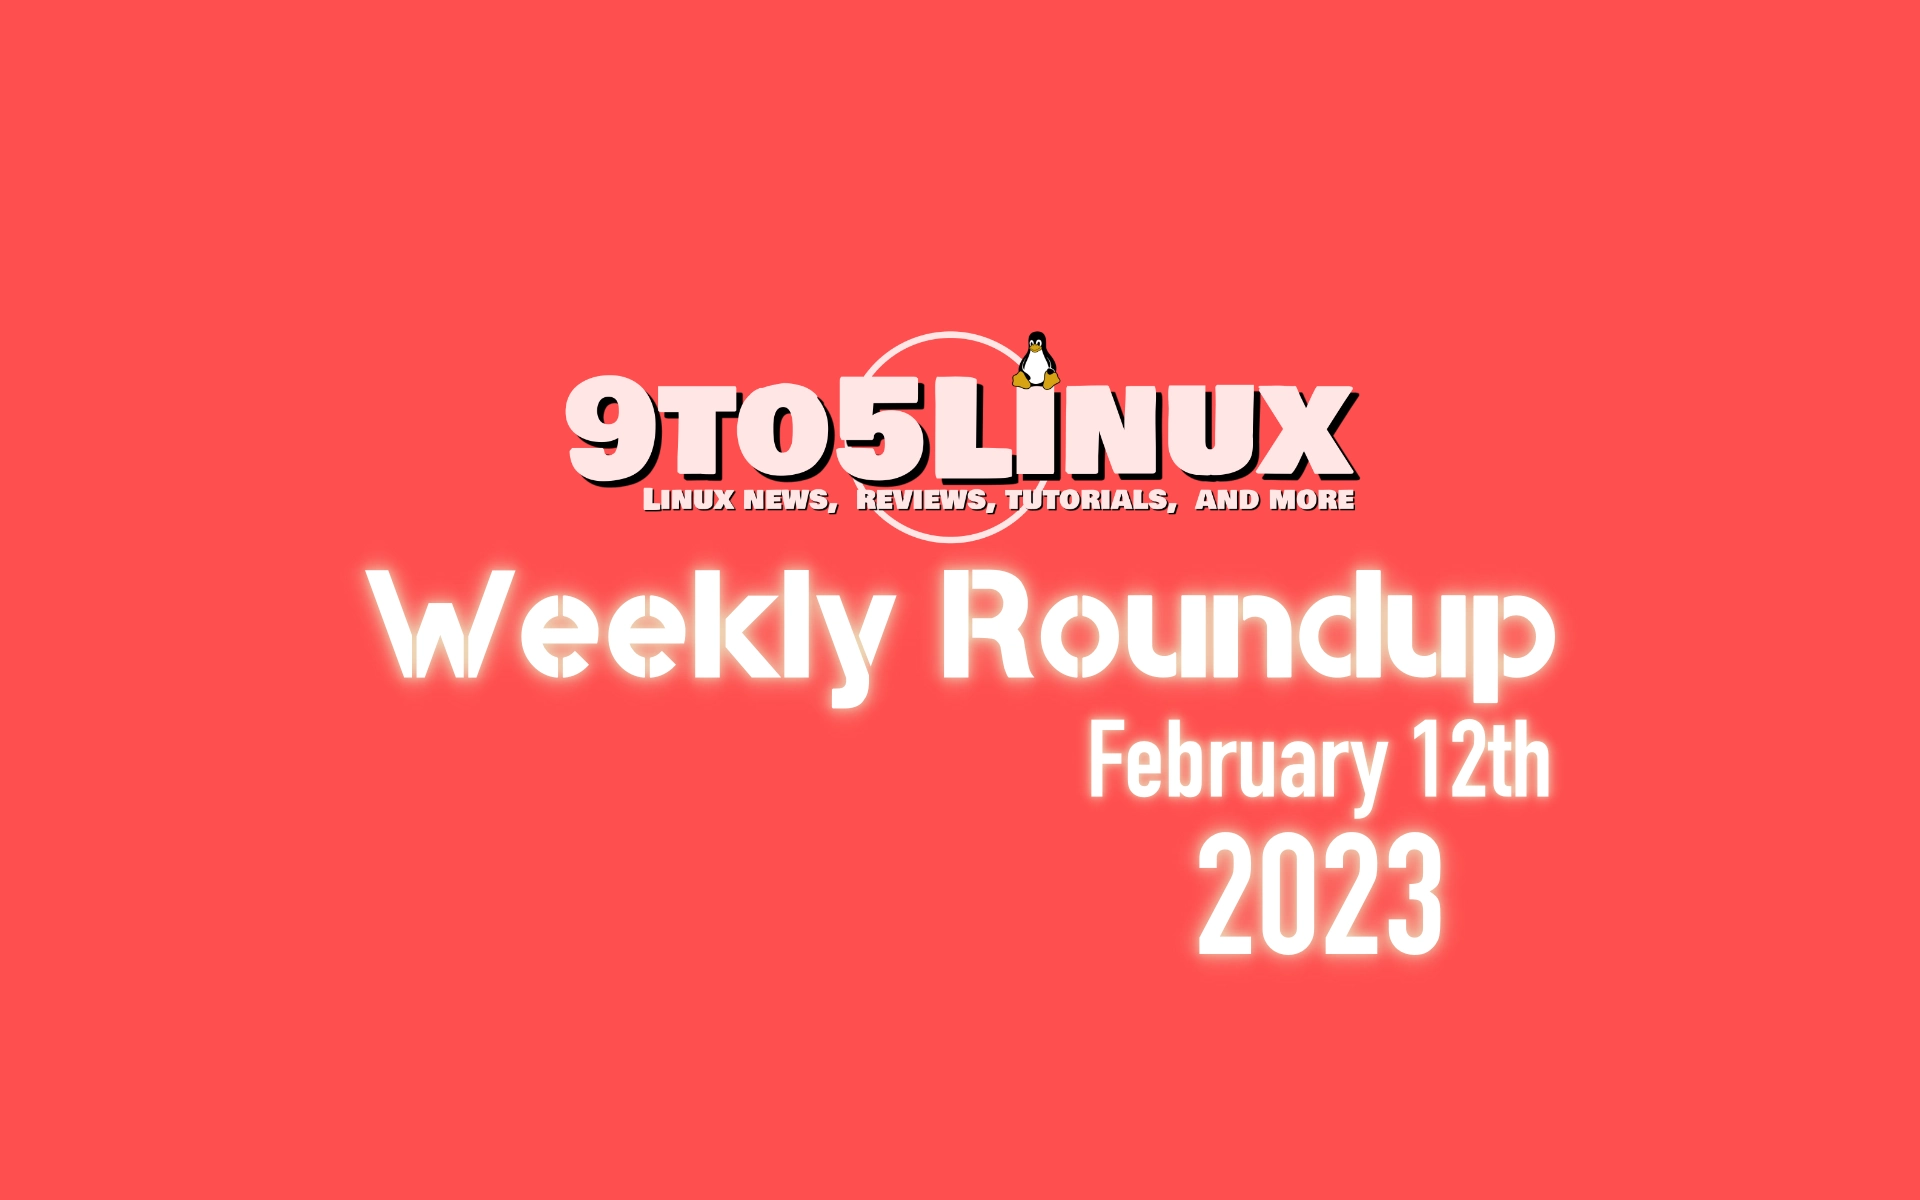 9to5Linux Weekly Roundup: February 12th, 2023